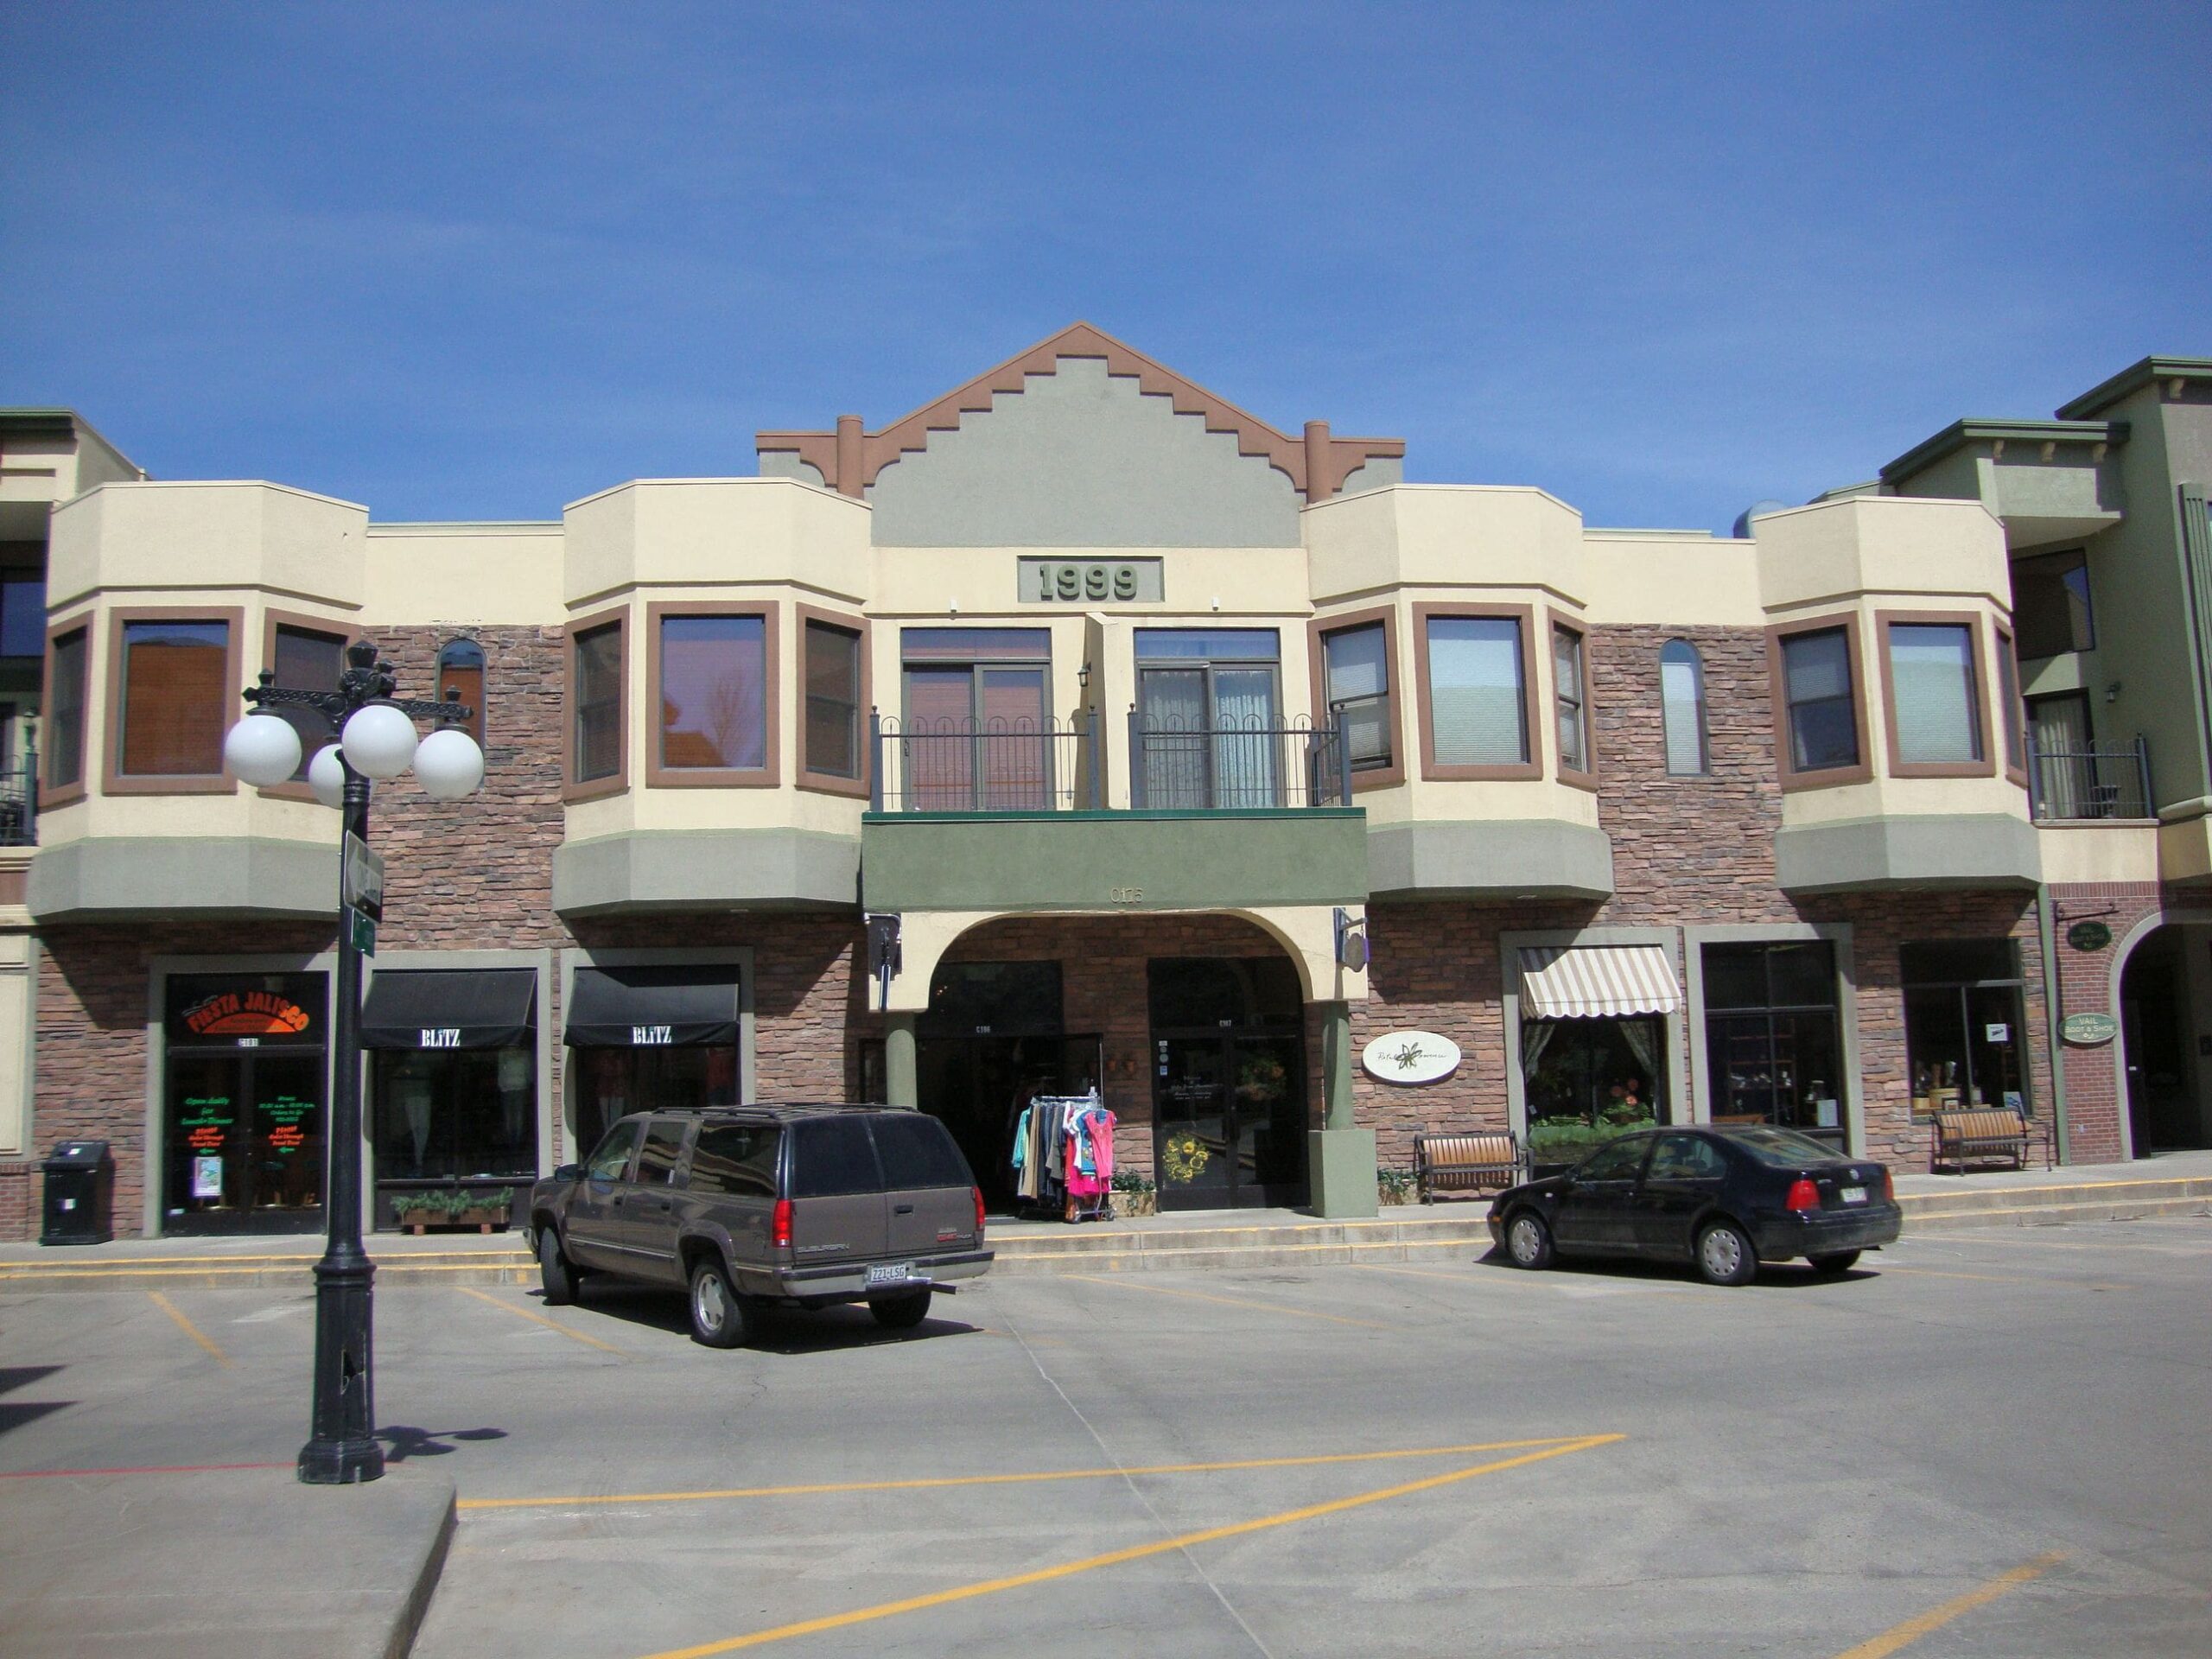 Exterior of Commercial Building in Edwards, CO.